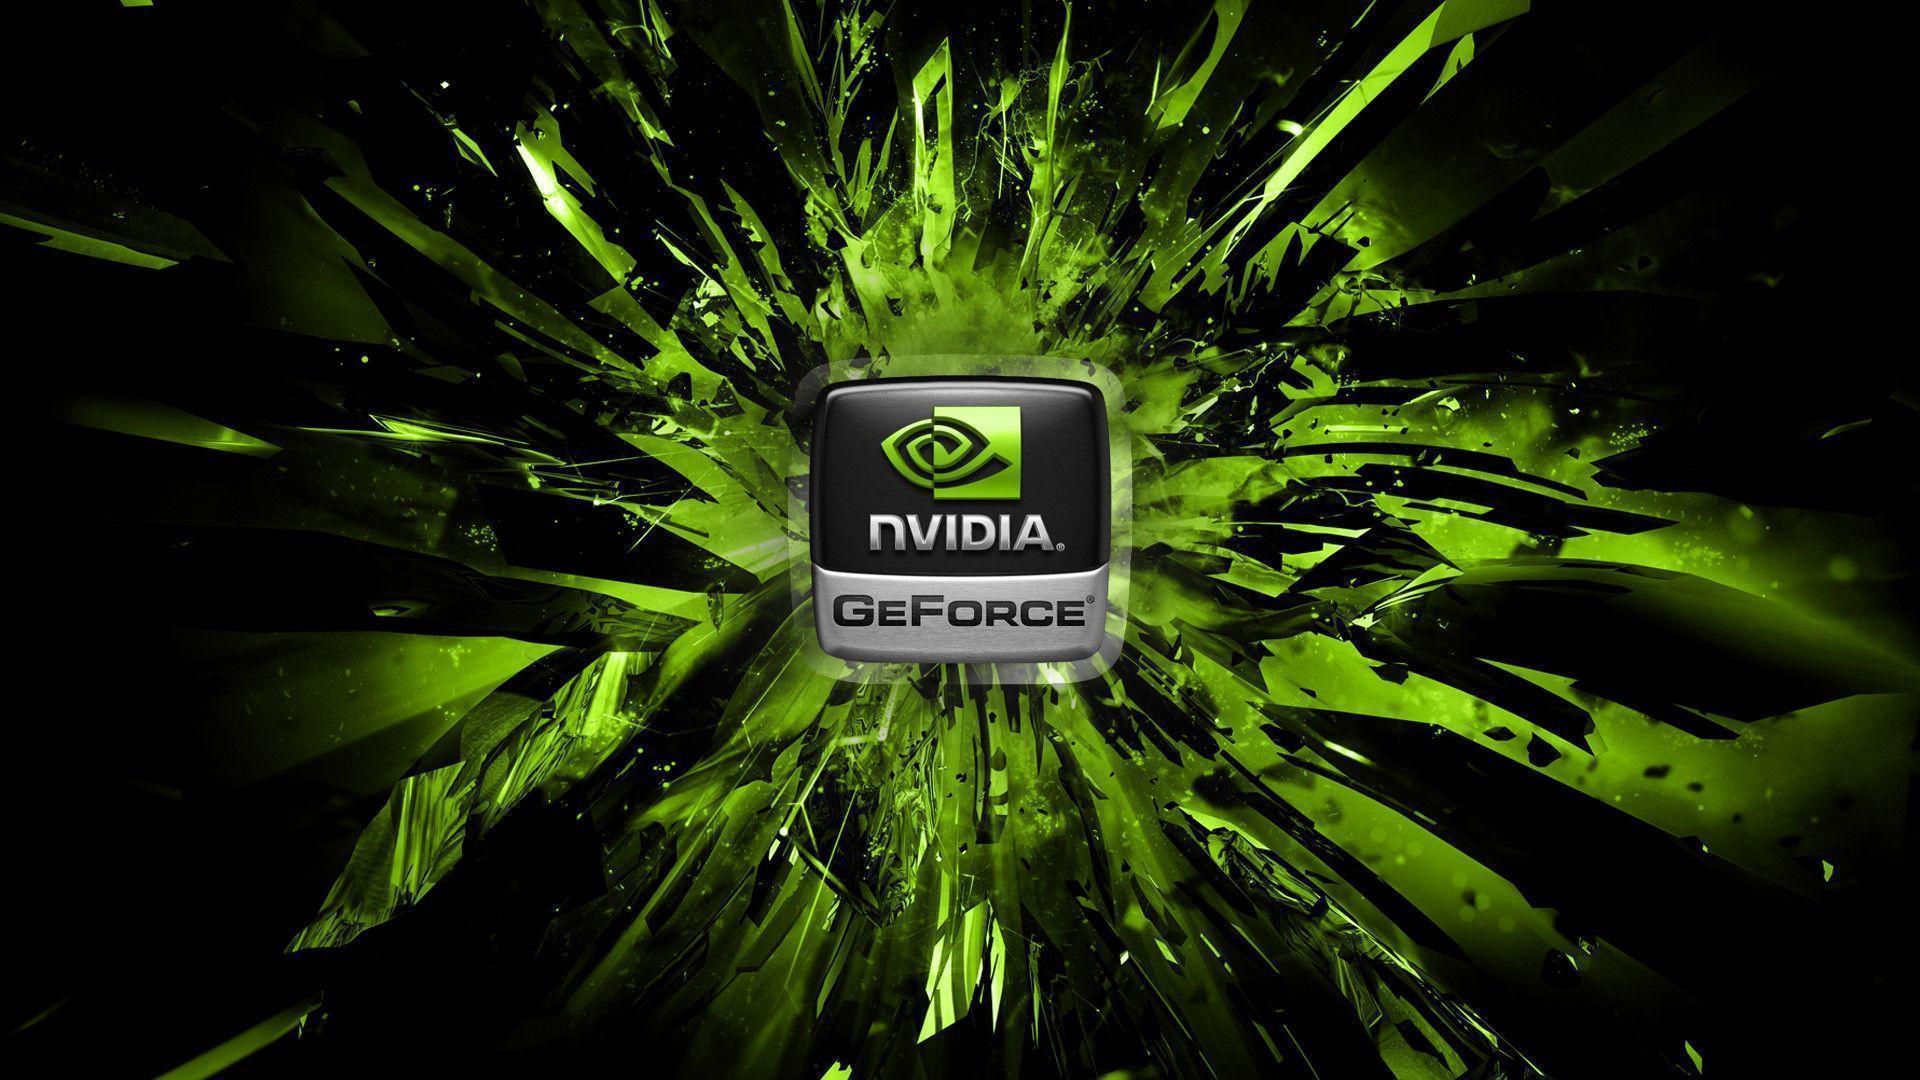 Wallpapers For > Nvidia Geforce Wallpapers 1080p